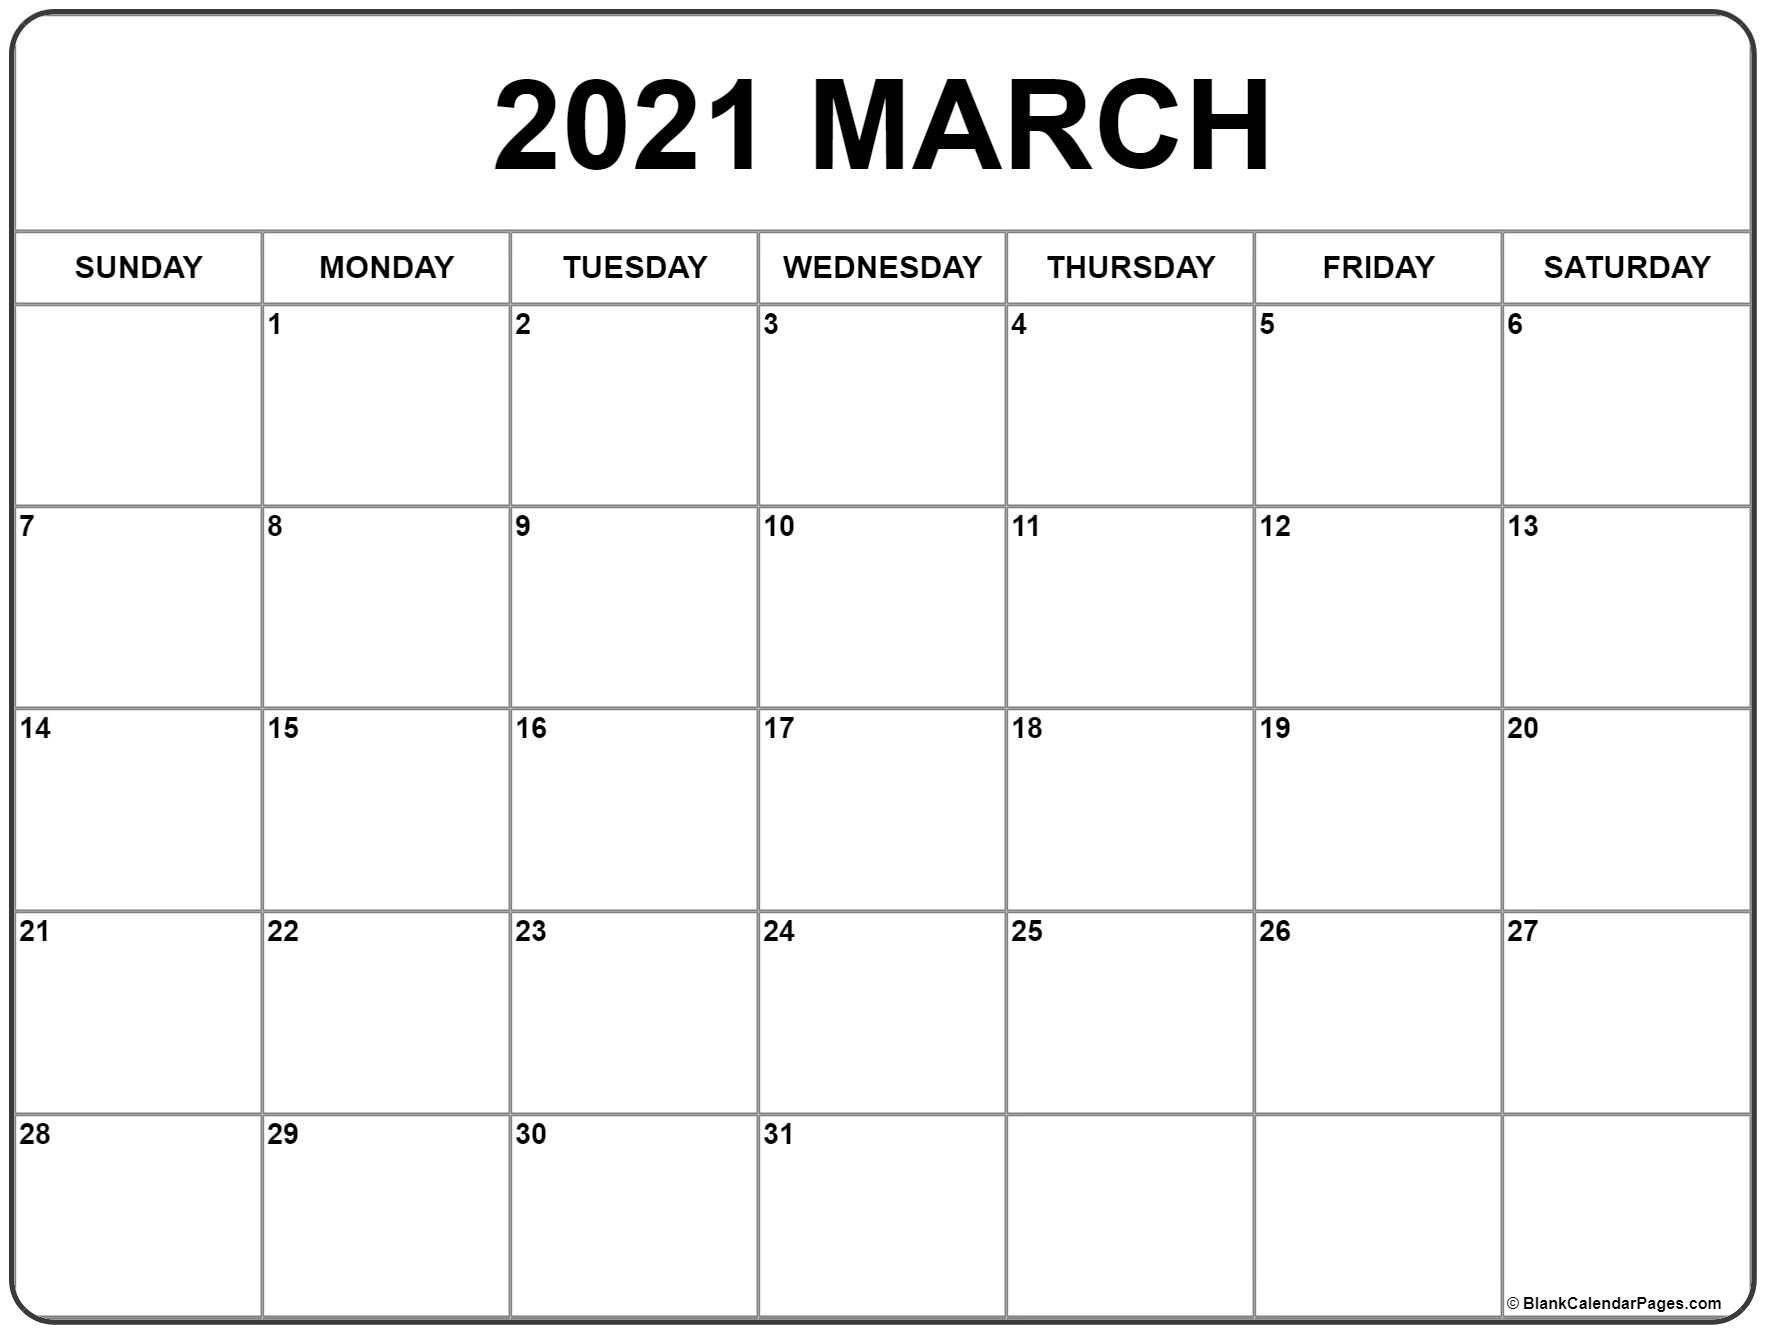 March 2021 Calendar | Free Printable Monthly Calendars-March Calendar 2021 Printable